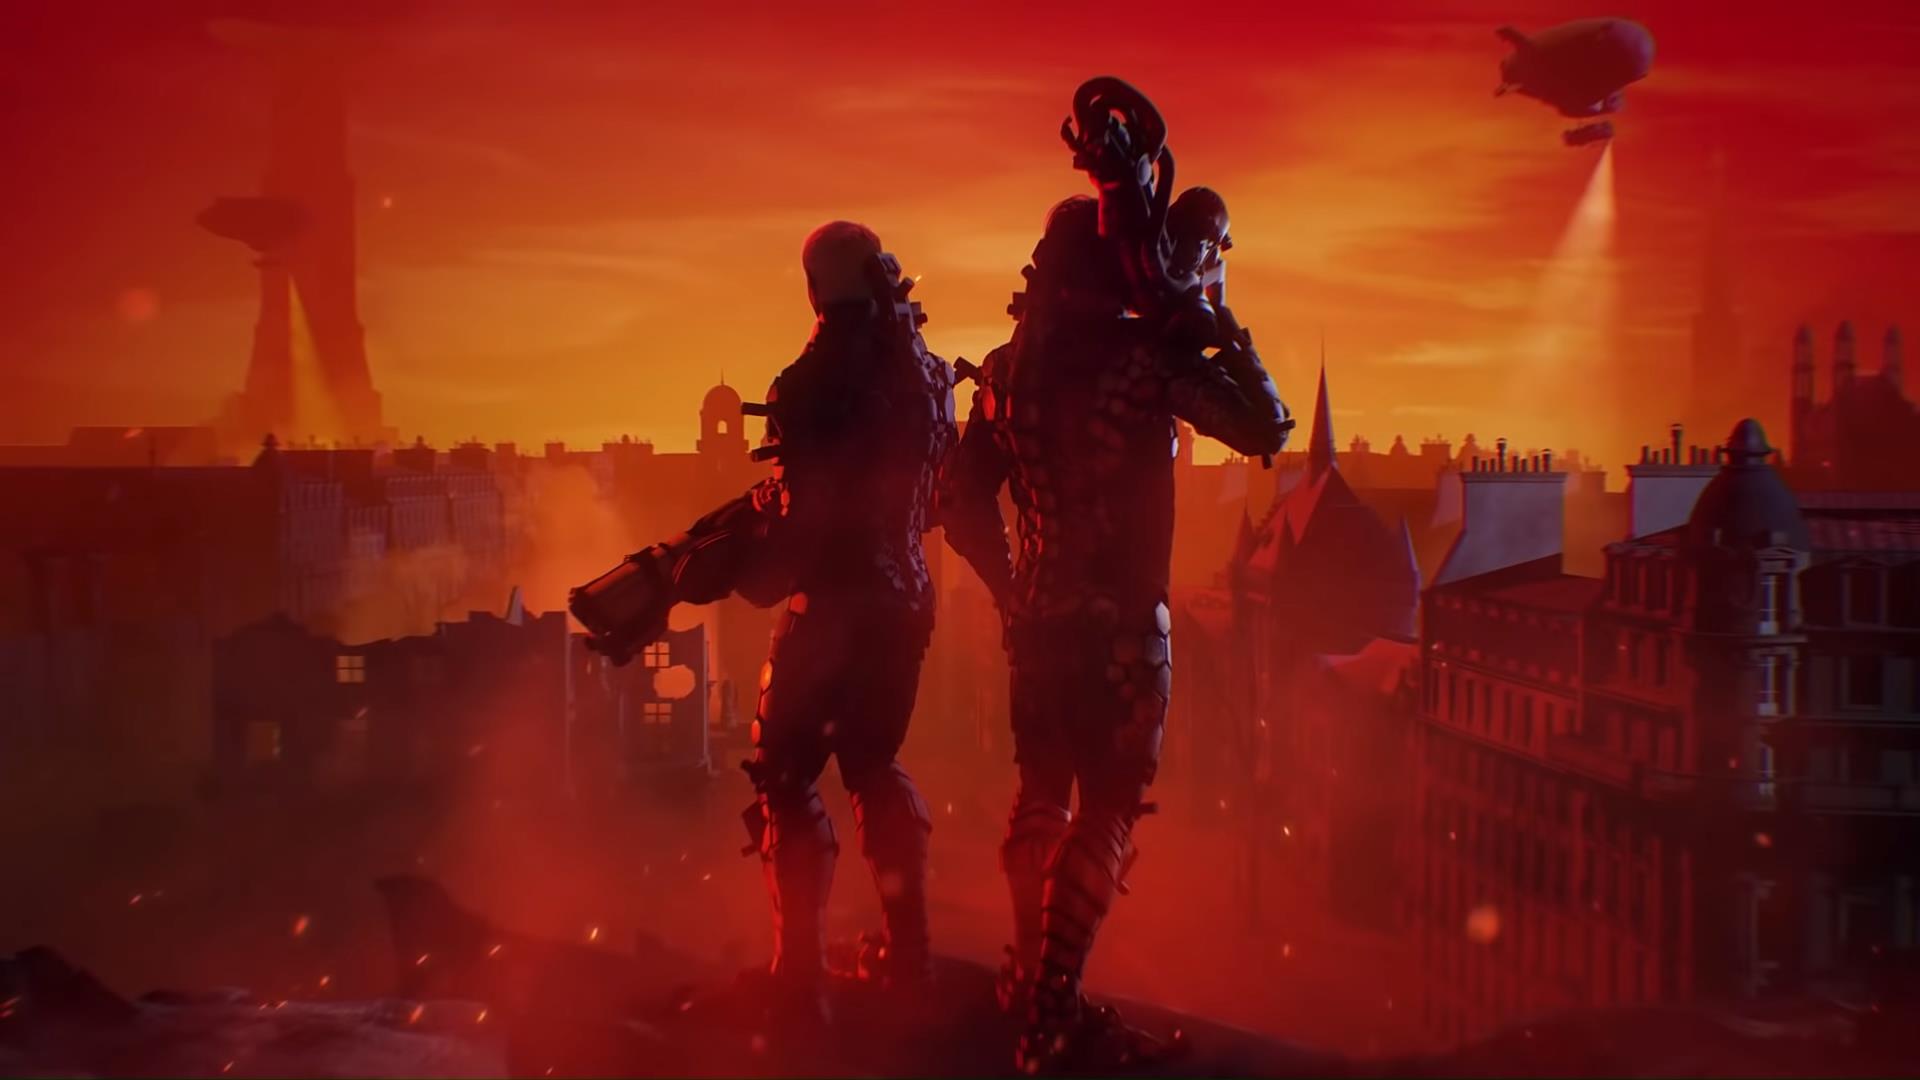 Wolfenstein Youngblood Update Versi 1.05 Catatan Patch Lengkap (PS4, Xbox One, PC)